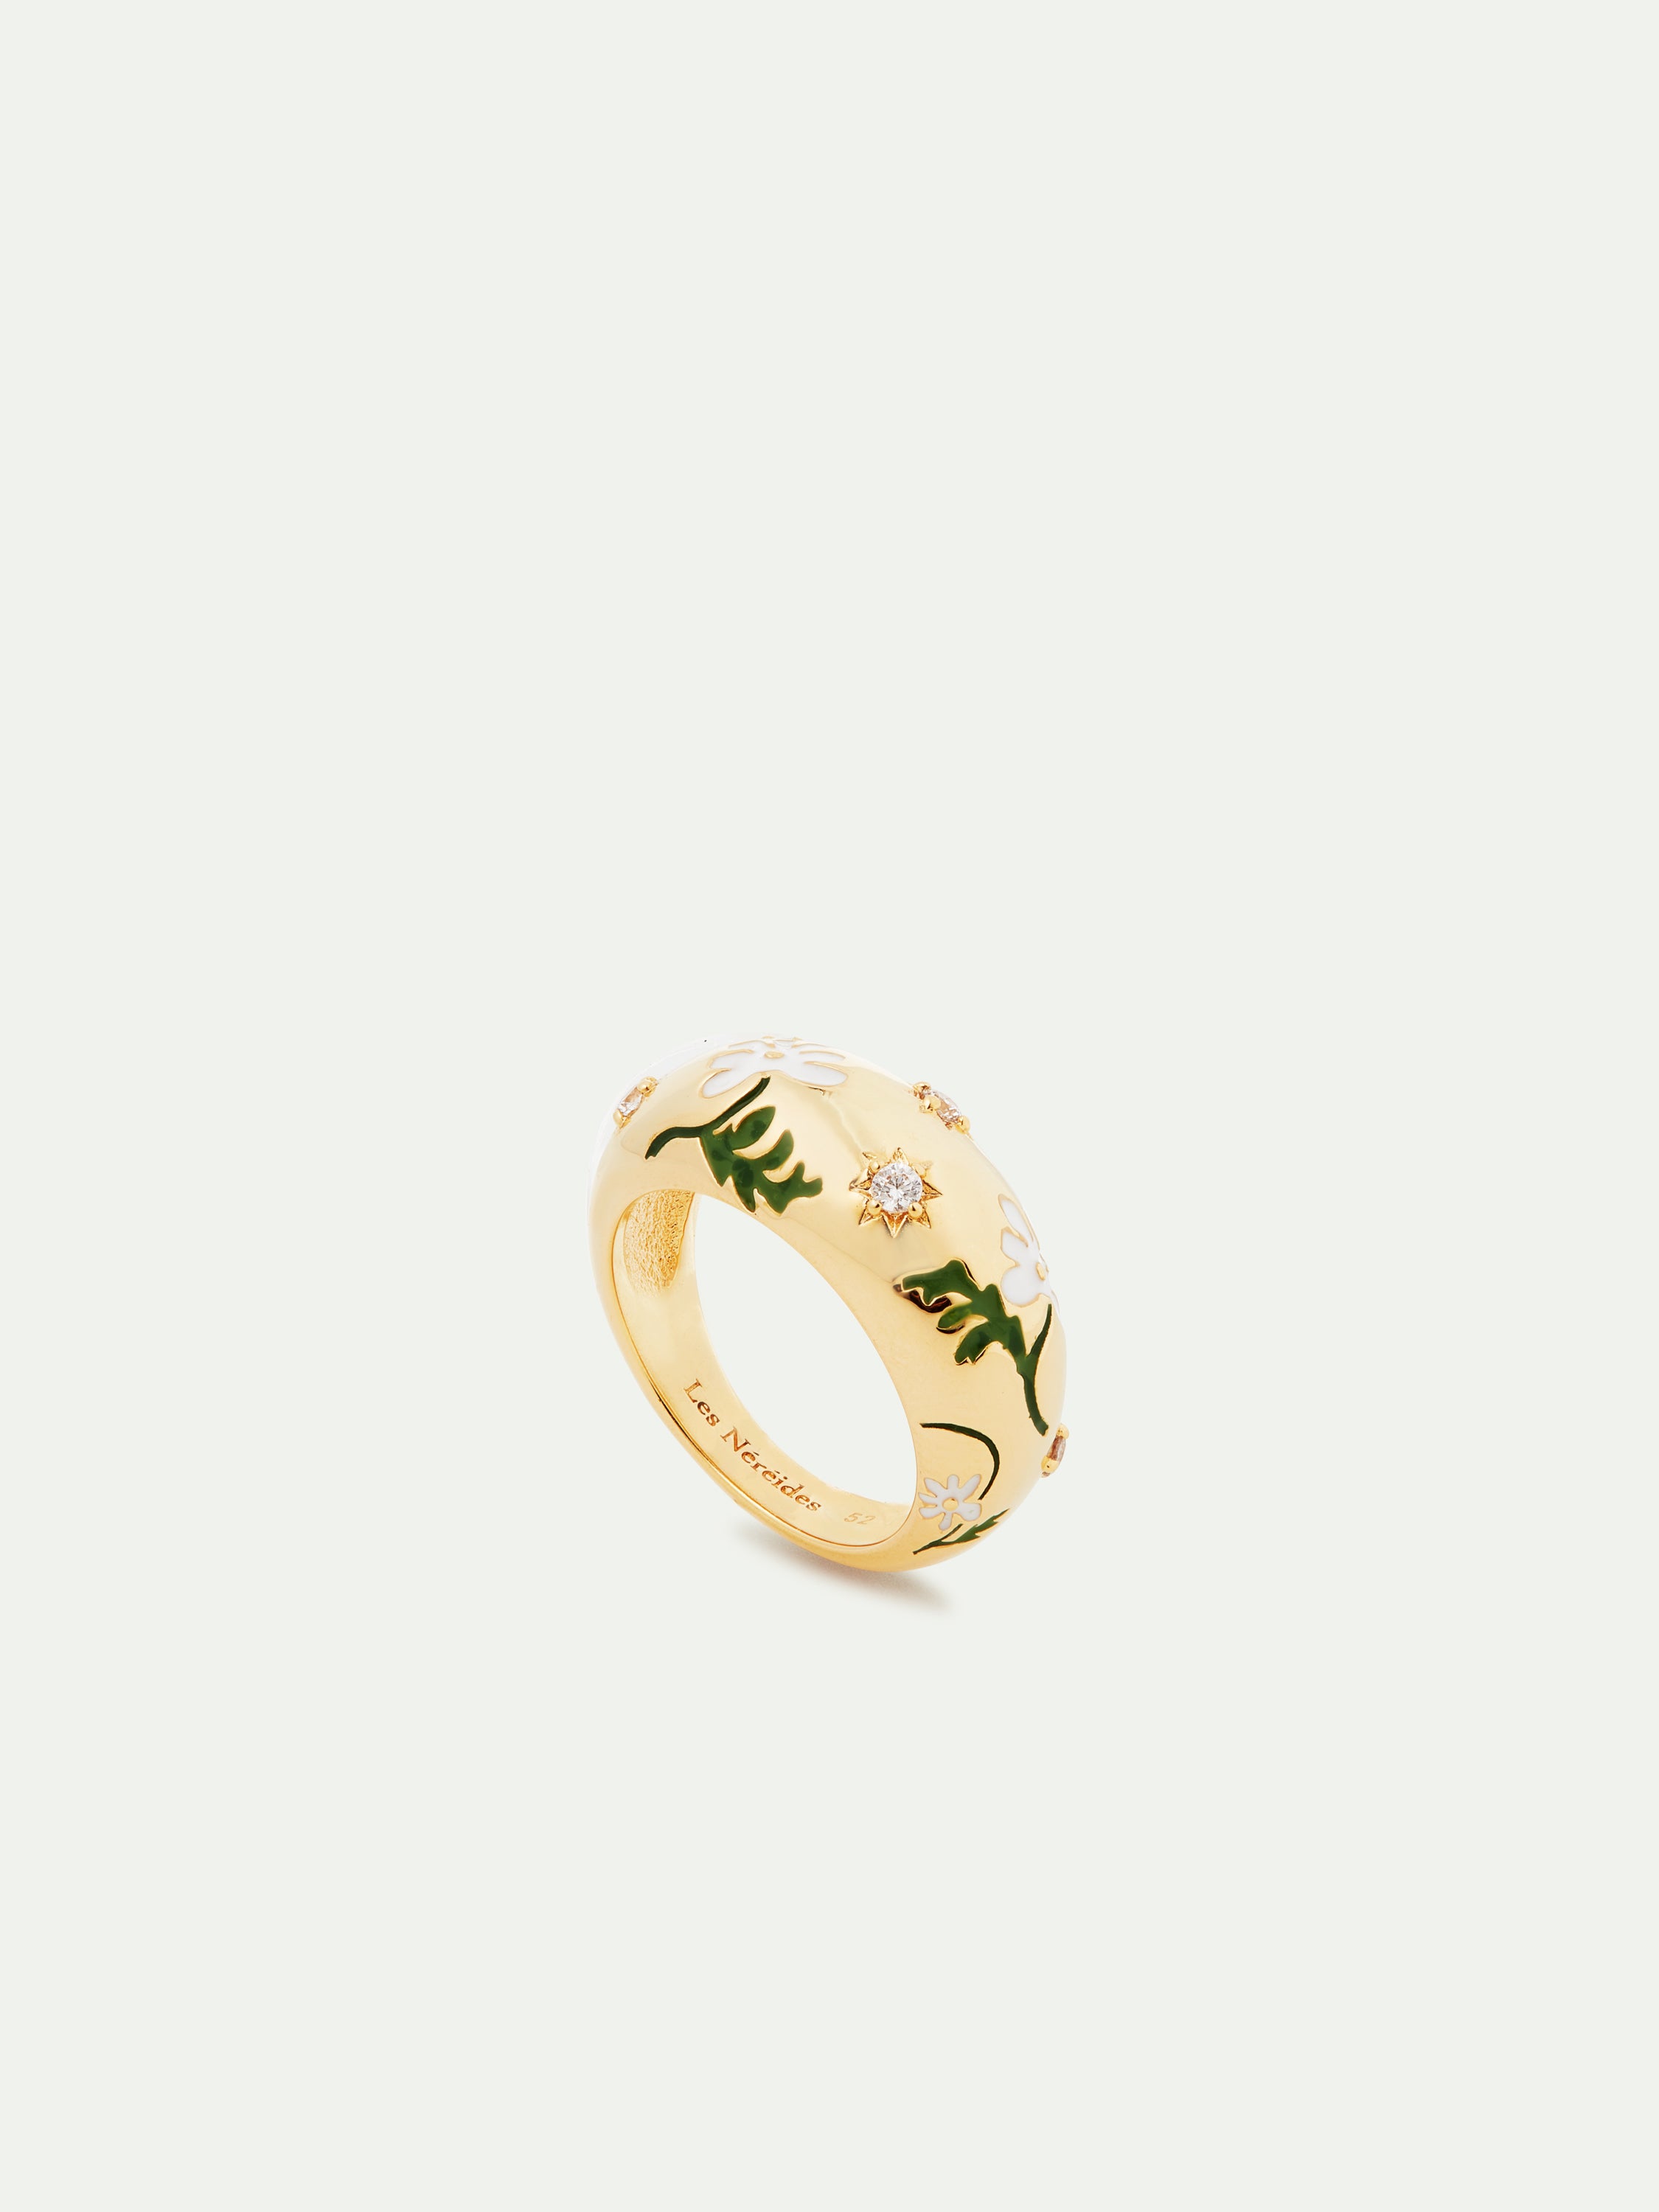 Star and daisy flower cocktail ring